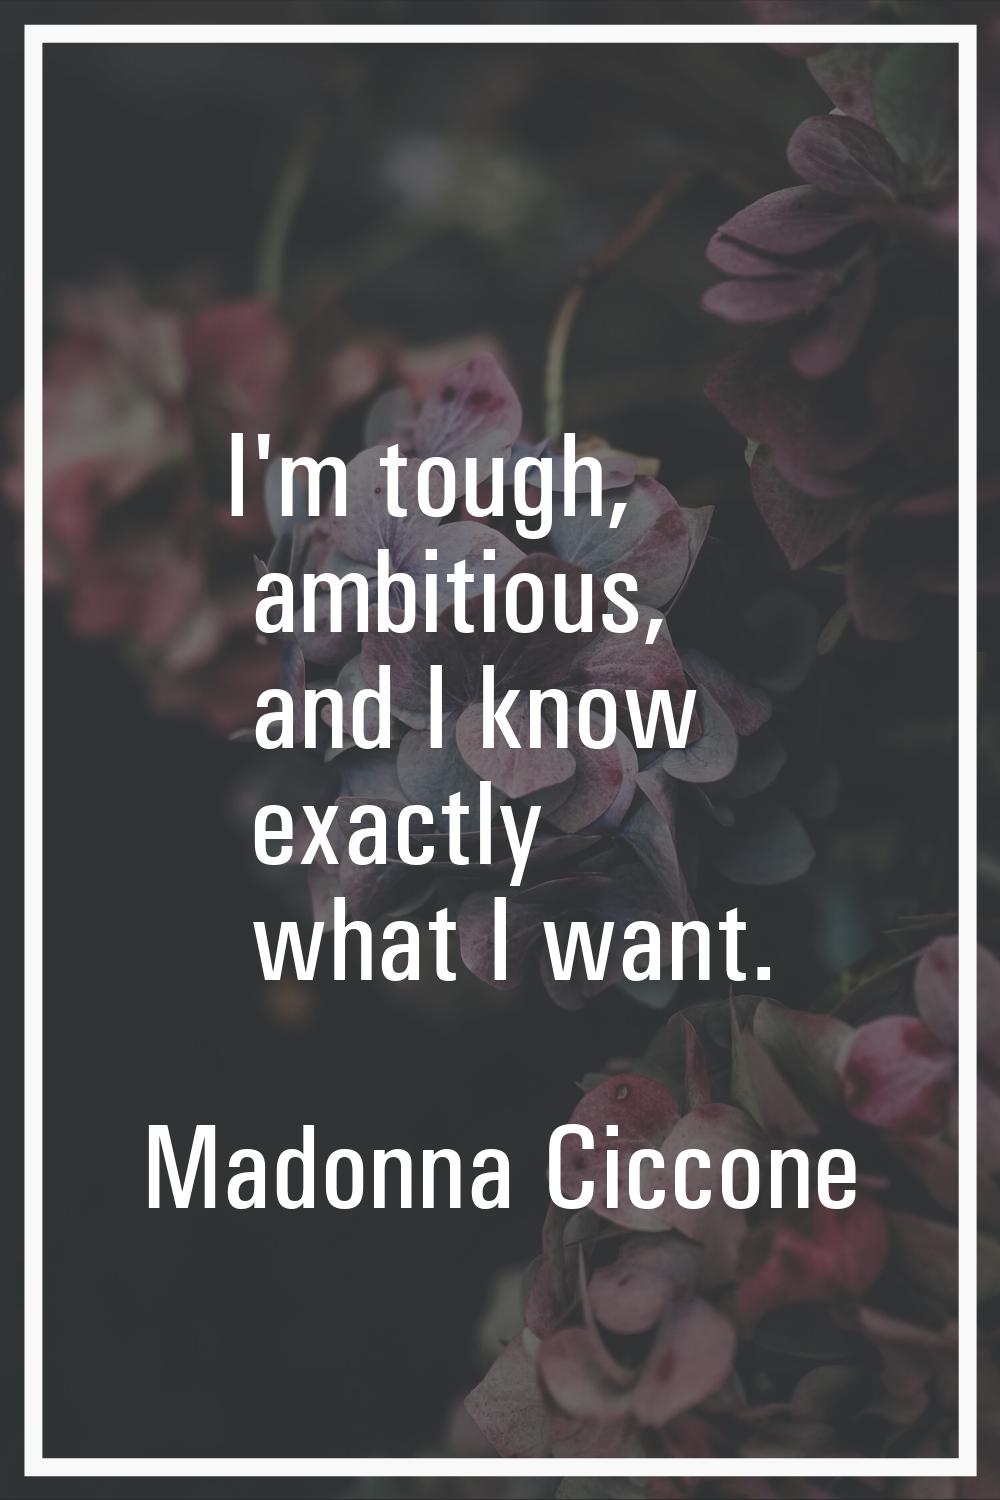 I'm tough, ambitious, and I know exactly what I want.